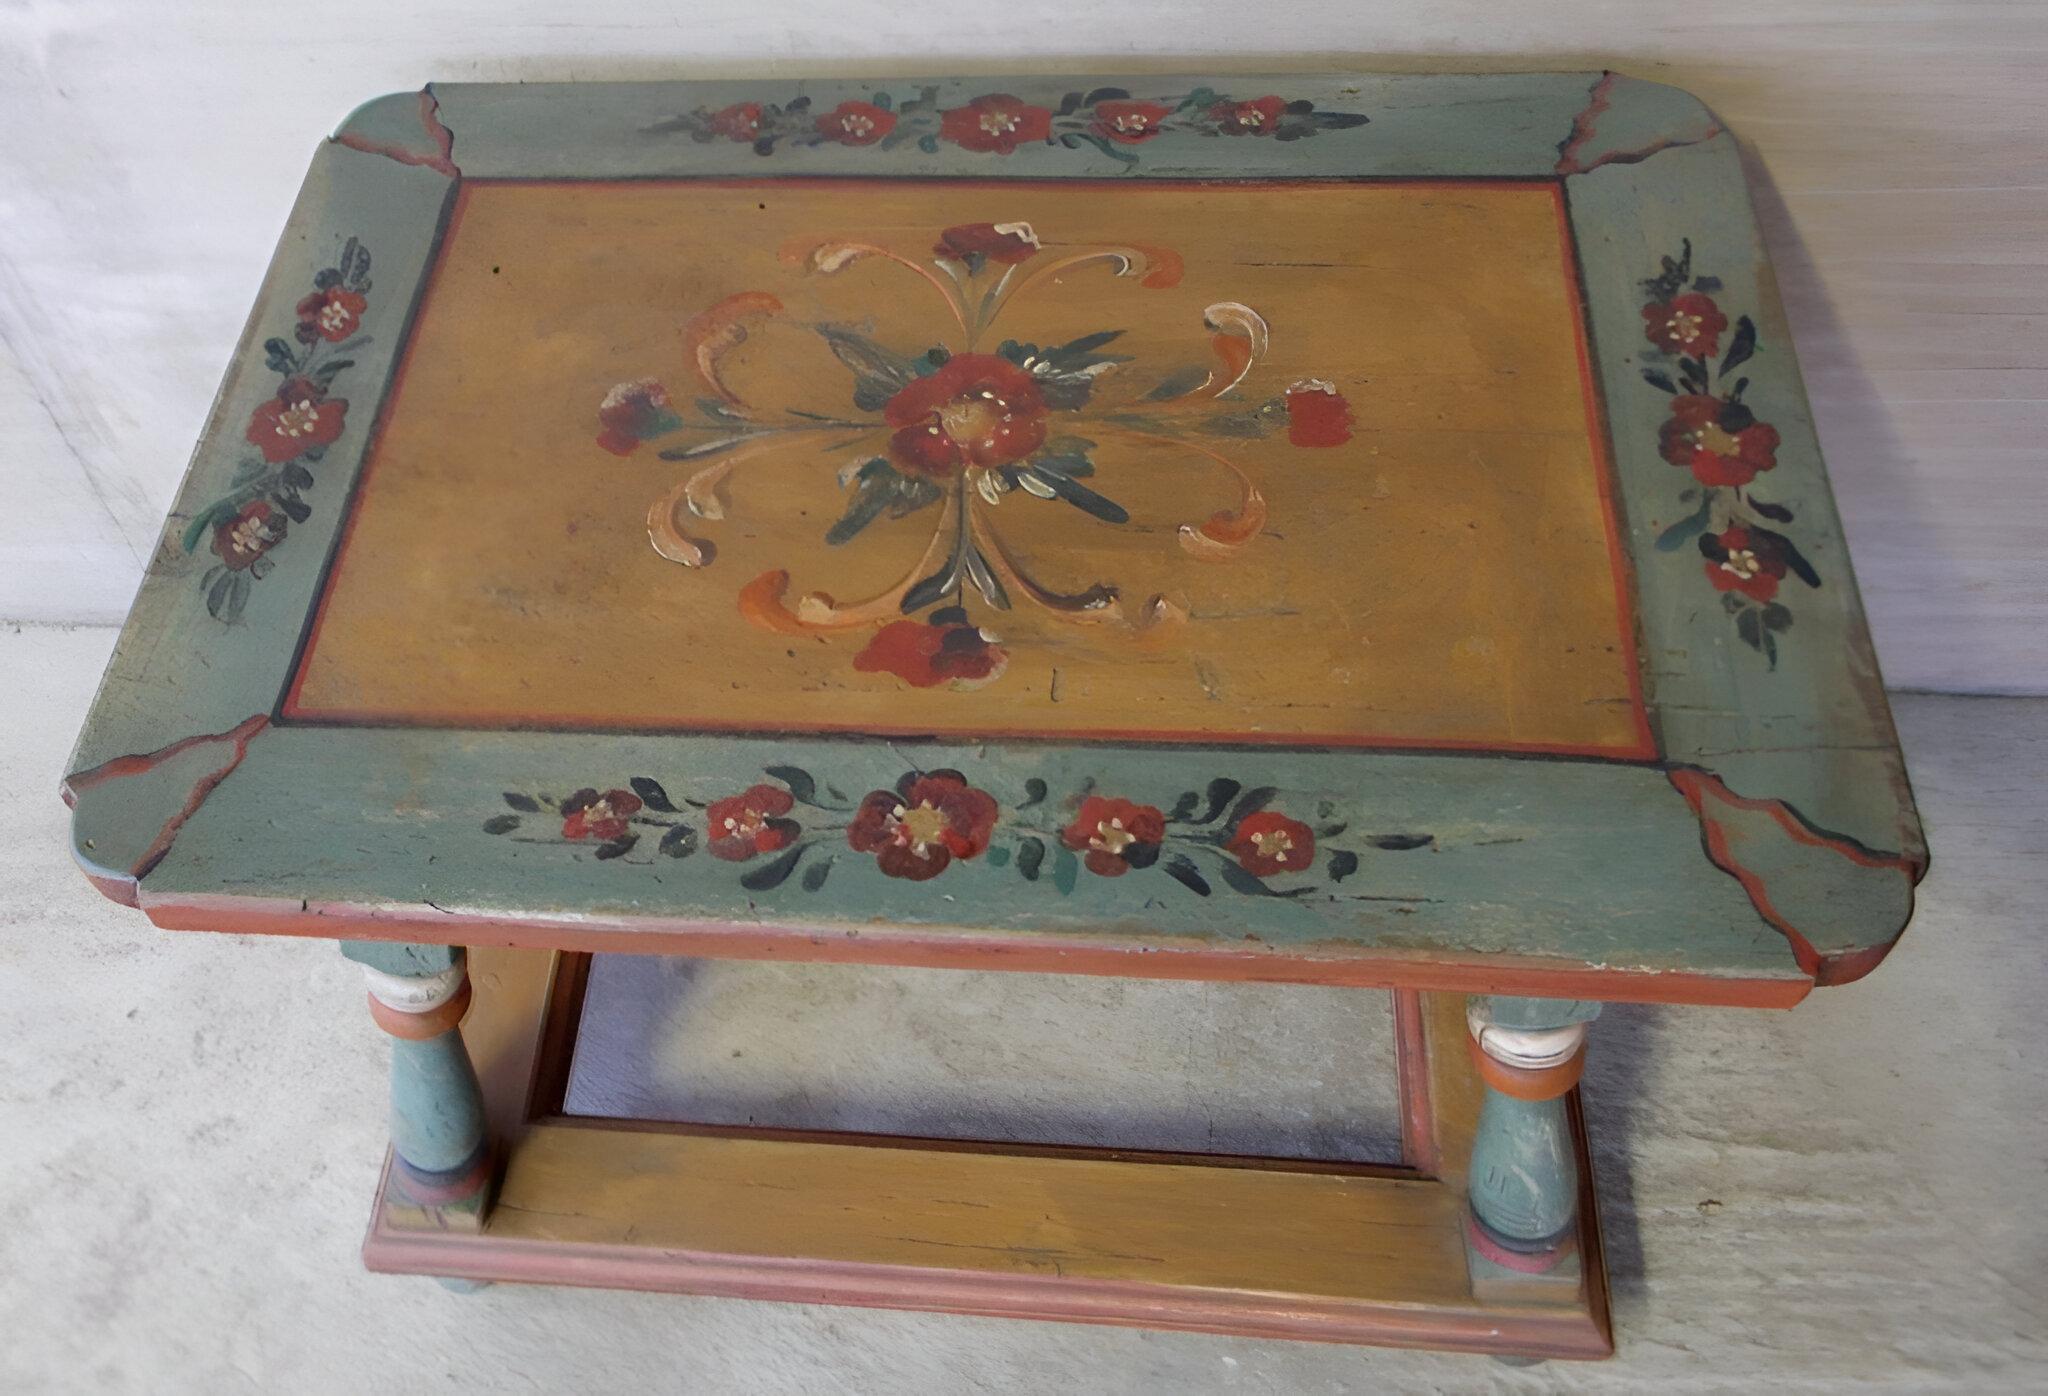 Small painted coffee table.
Good for furnishing, with small drawer.
Decorated on a green/blue background with floral motifs on the top.

Reference measurements at the frame.

More pictures and information at customer's request.
